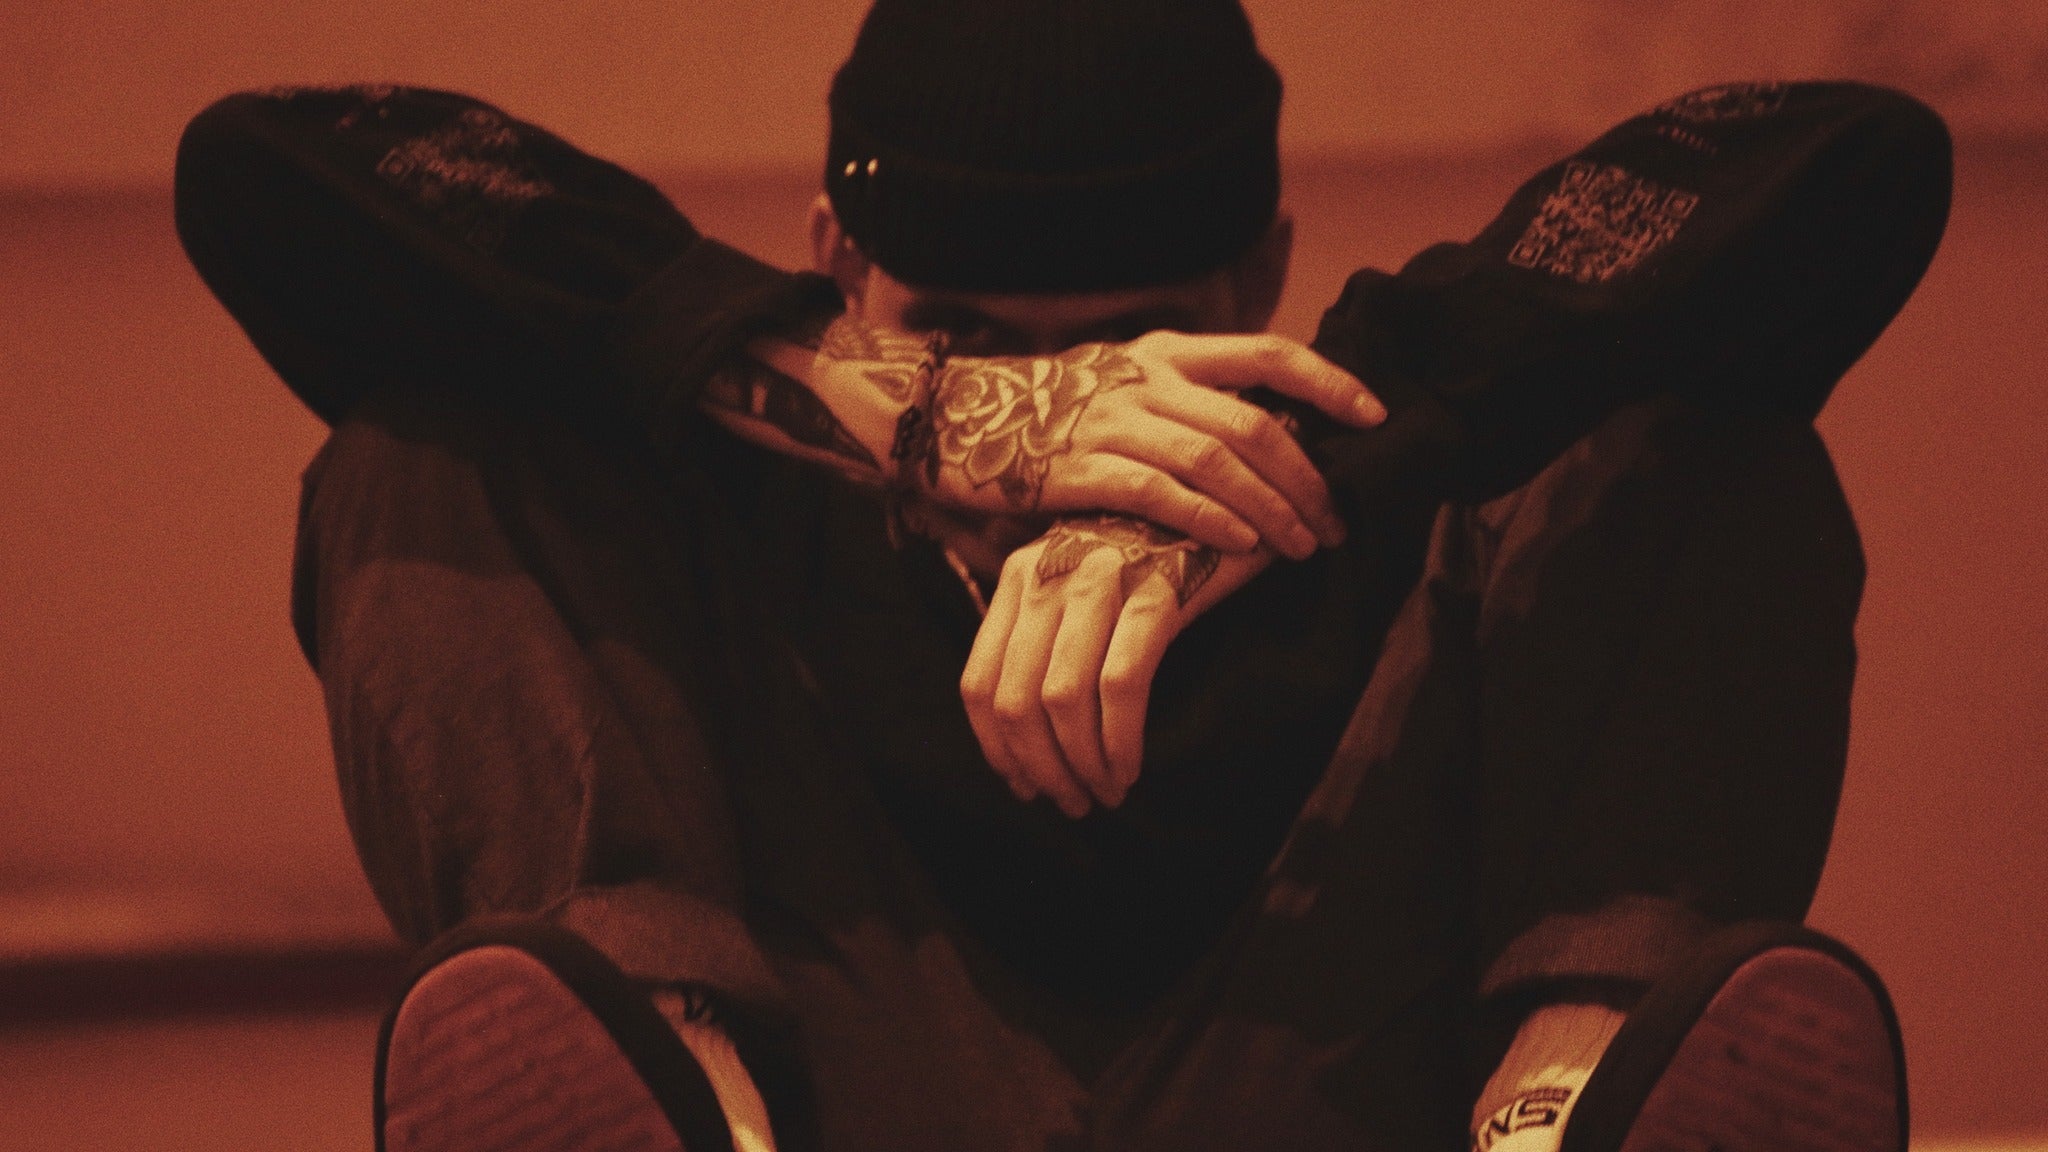 nothing,nowhere. in Seattle promo photo for Bandsintown Tracker presale offer code